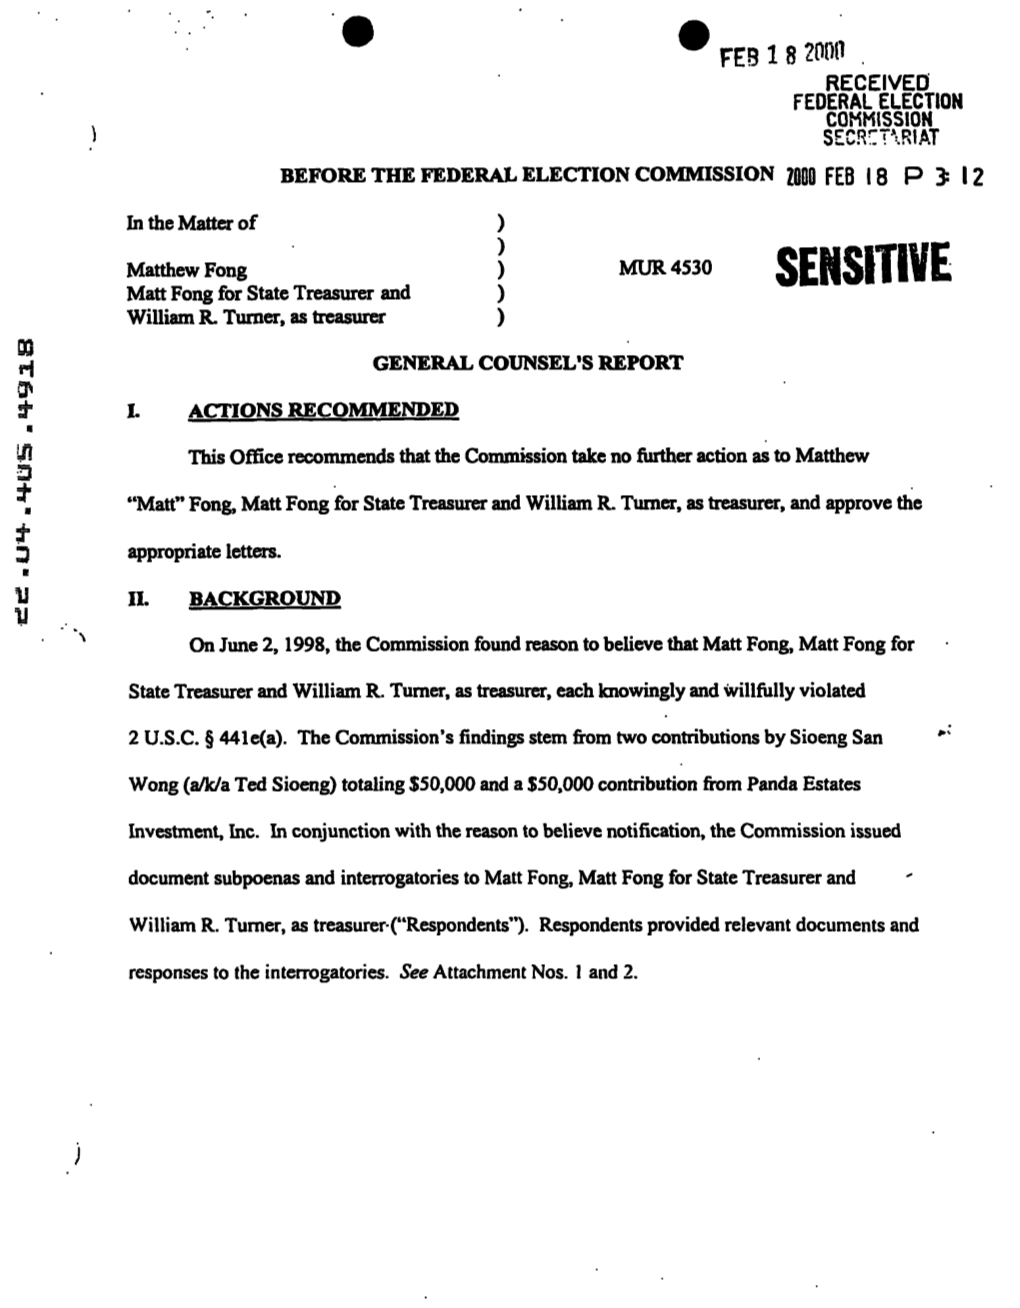 General Counsel's Report Background